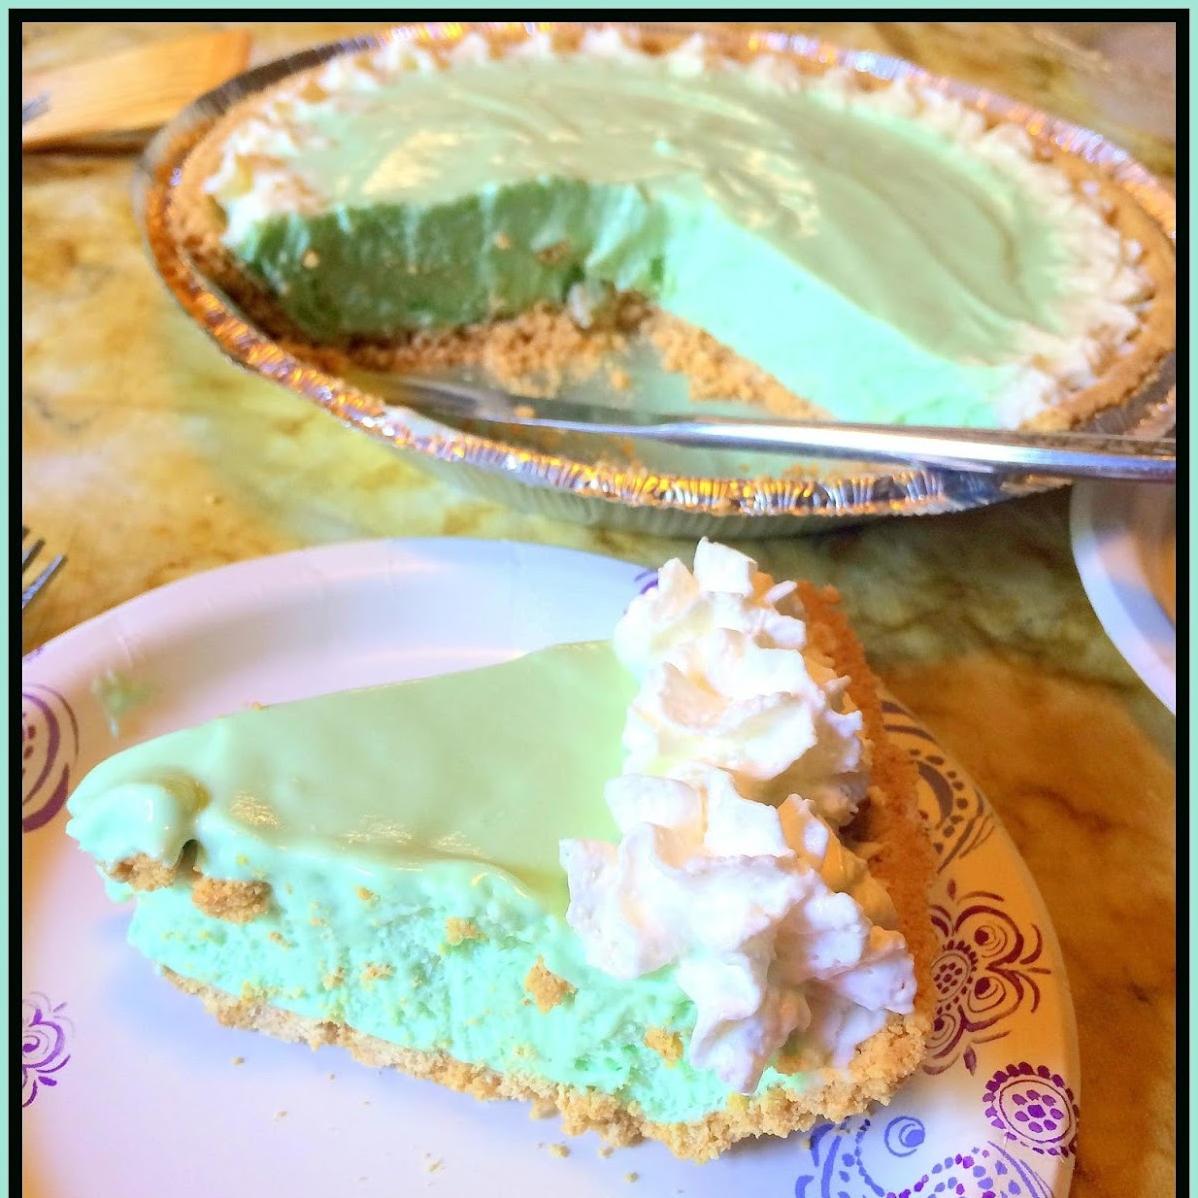  The graham cracker crust adds a delicious crunch!